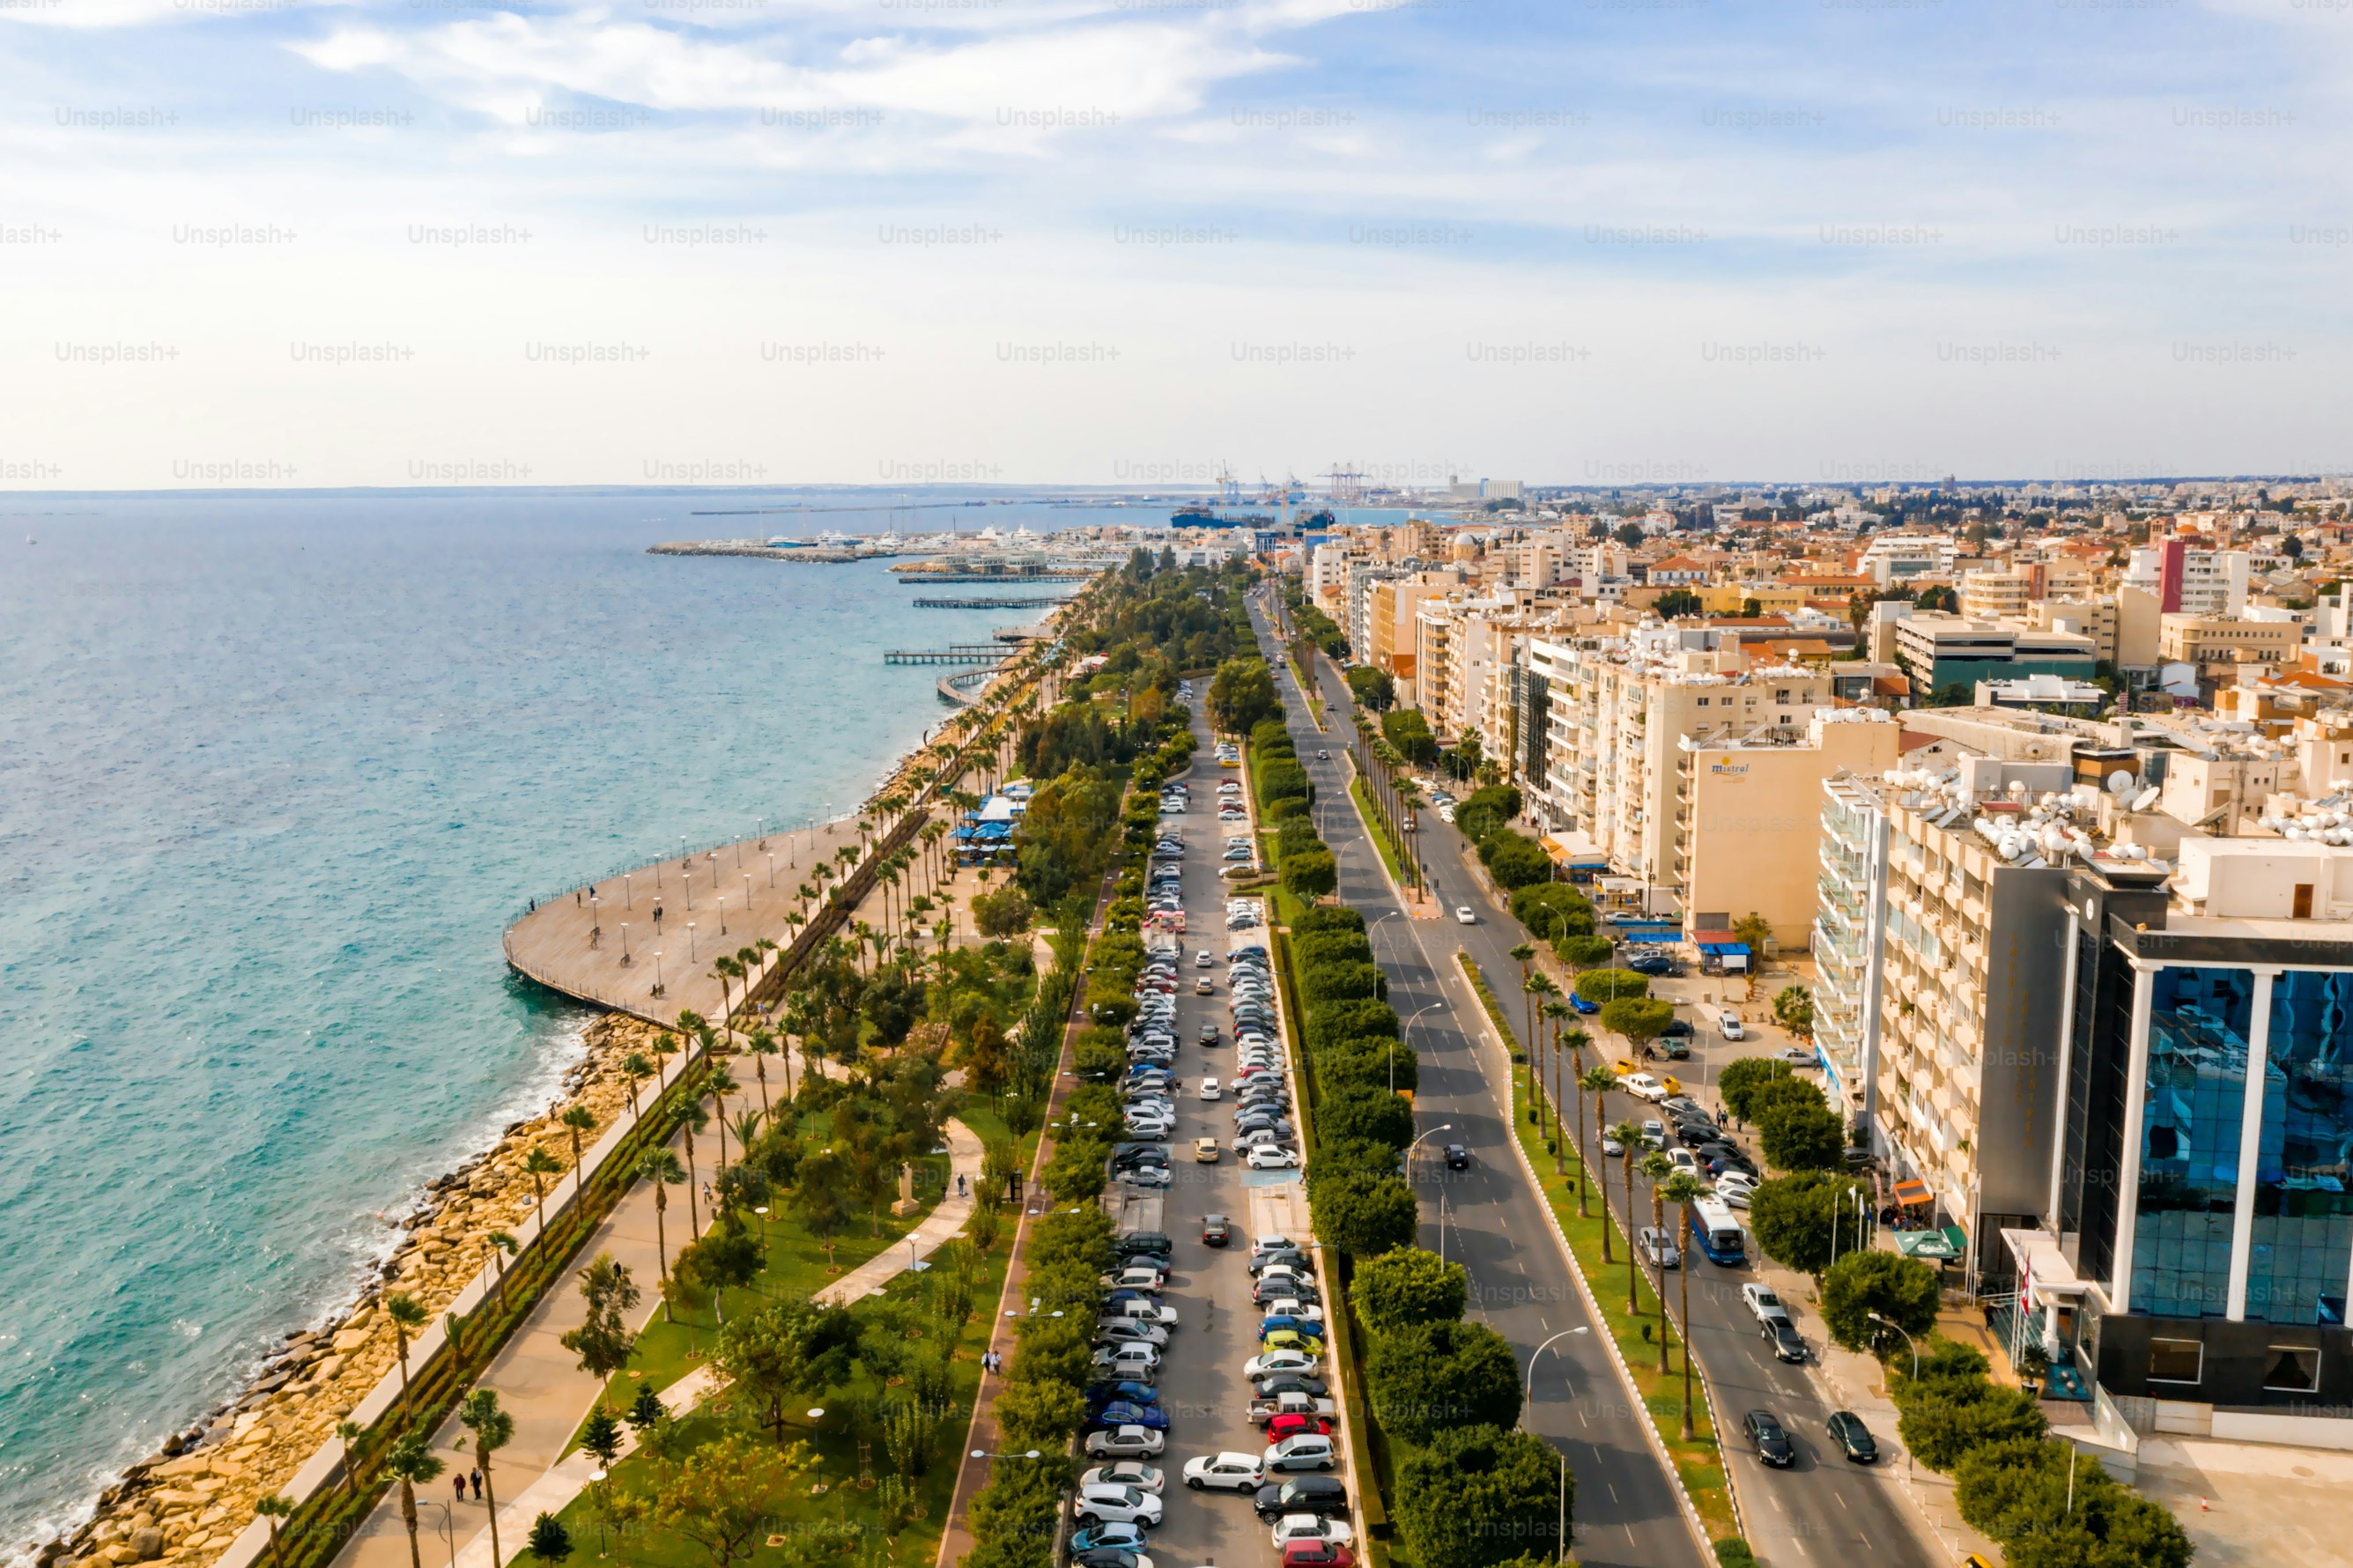 Limassol, Cyprus: When to Go for the Perfect Vacation